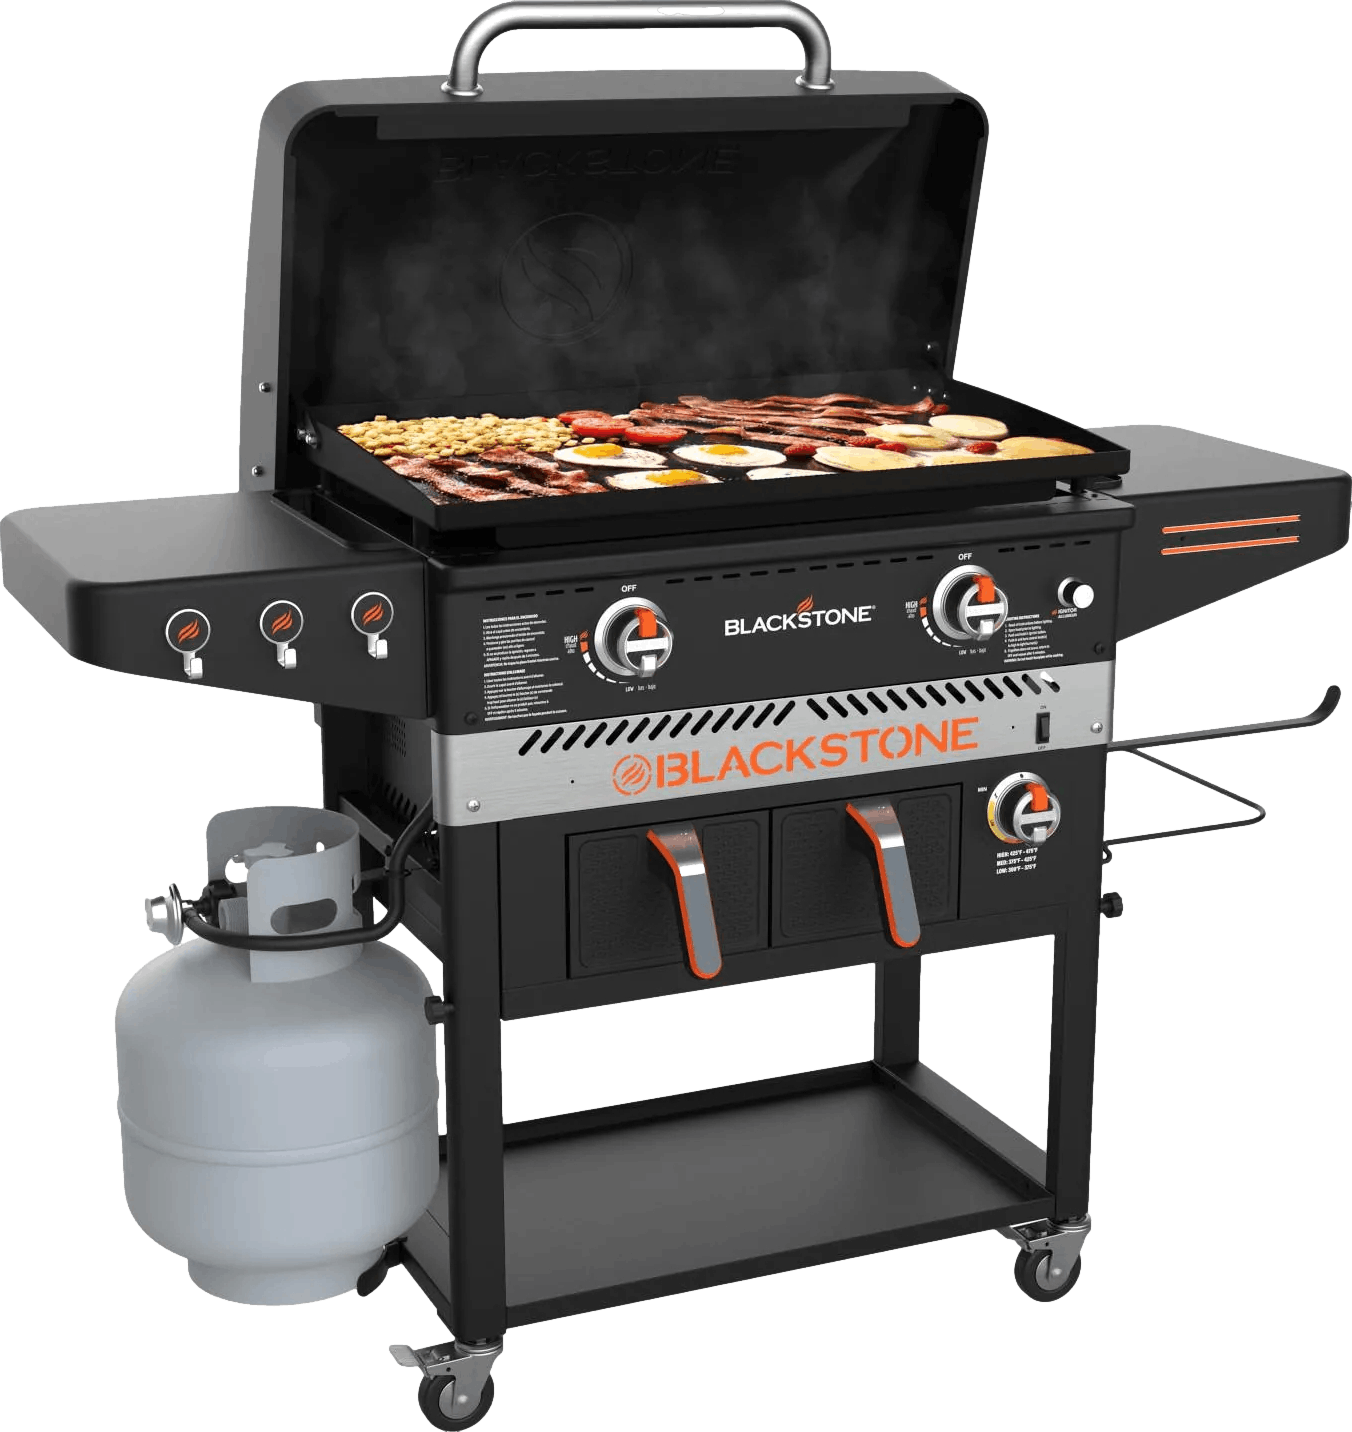 Blackstone Patio Gas Griddle Cooking Station with Air Fryer · 28 in. · Propane